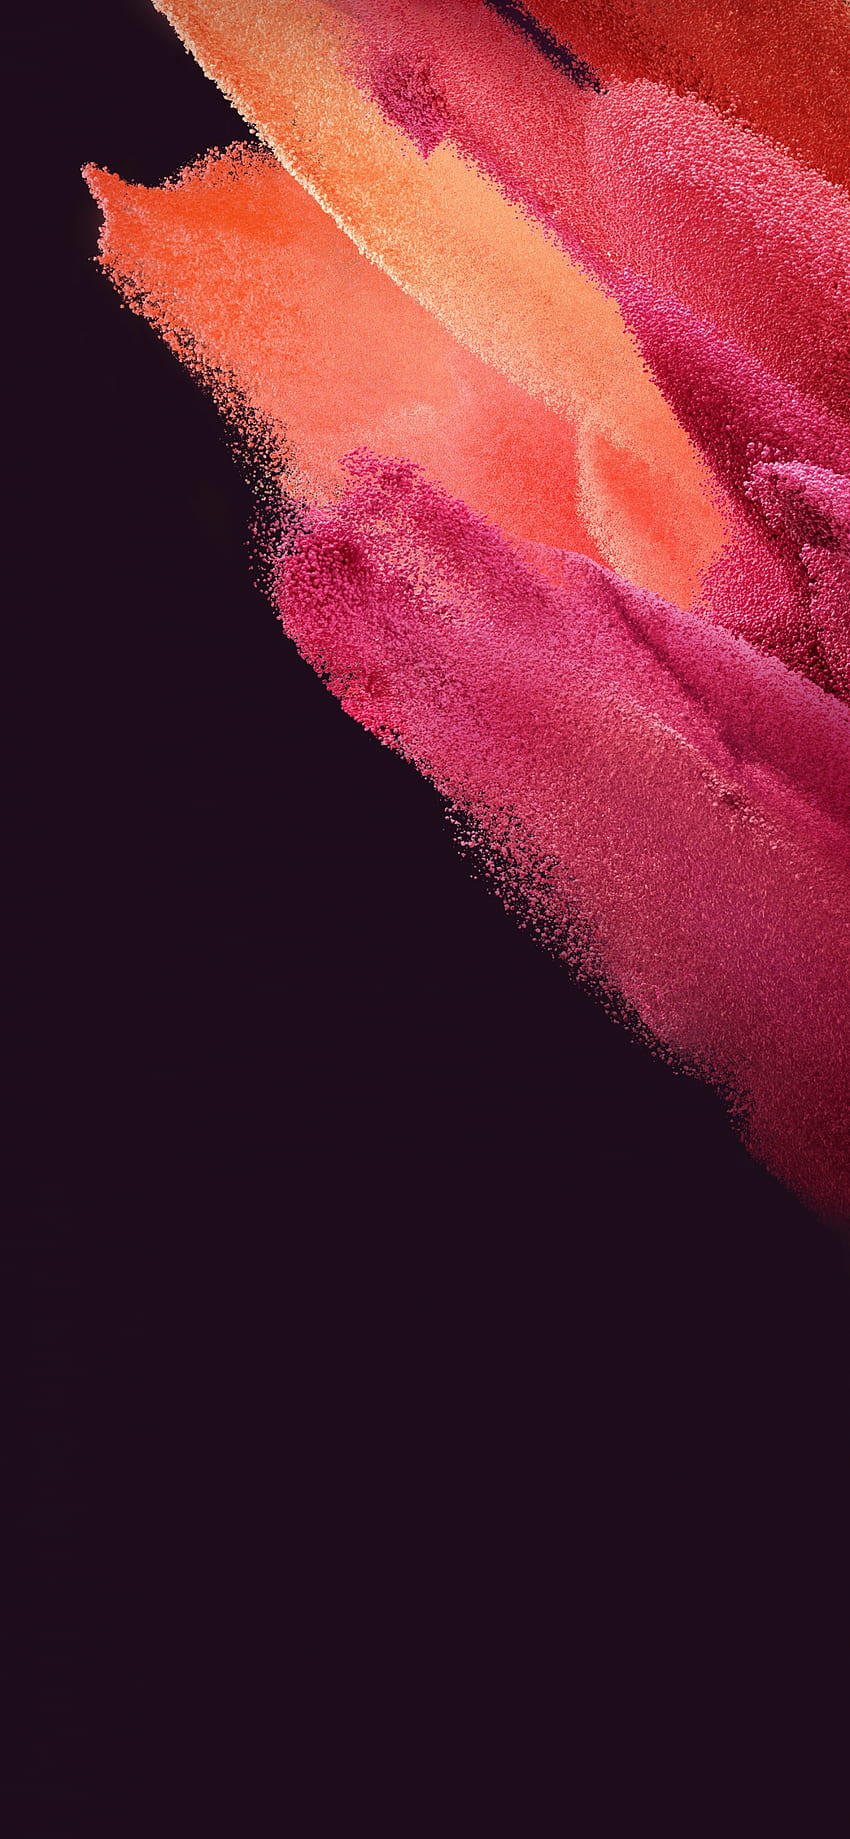 Samsung Galaxy S21, Stock, AMOLED, Particles, Magenta, Red, Abstract, Pink and Black Galaxy HD 전화 배경 화면